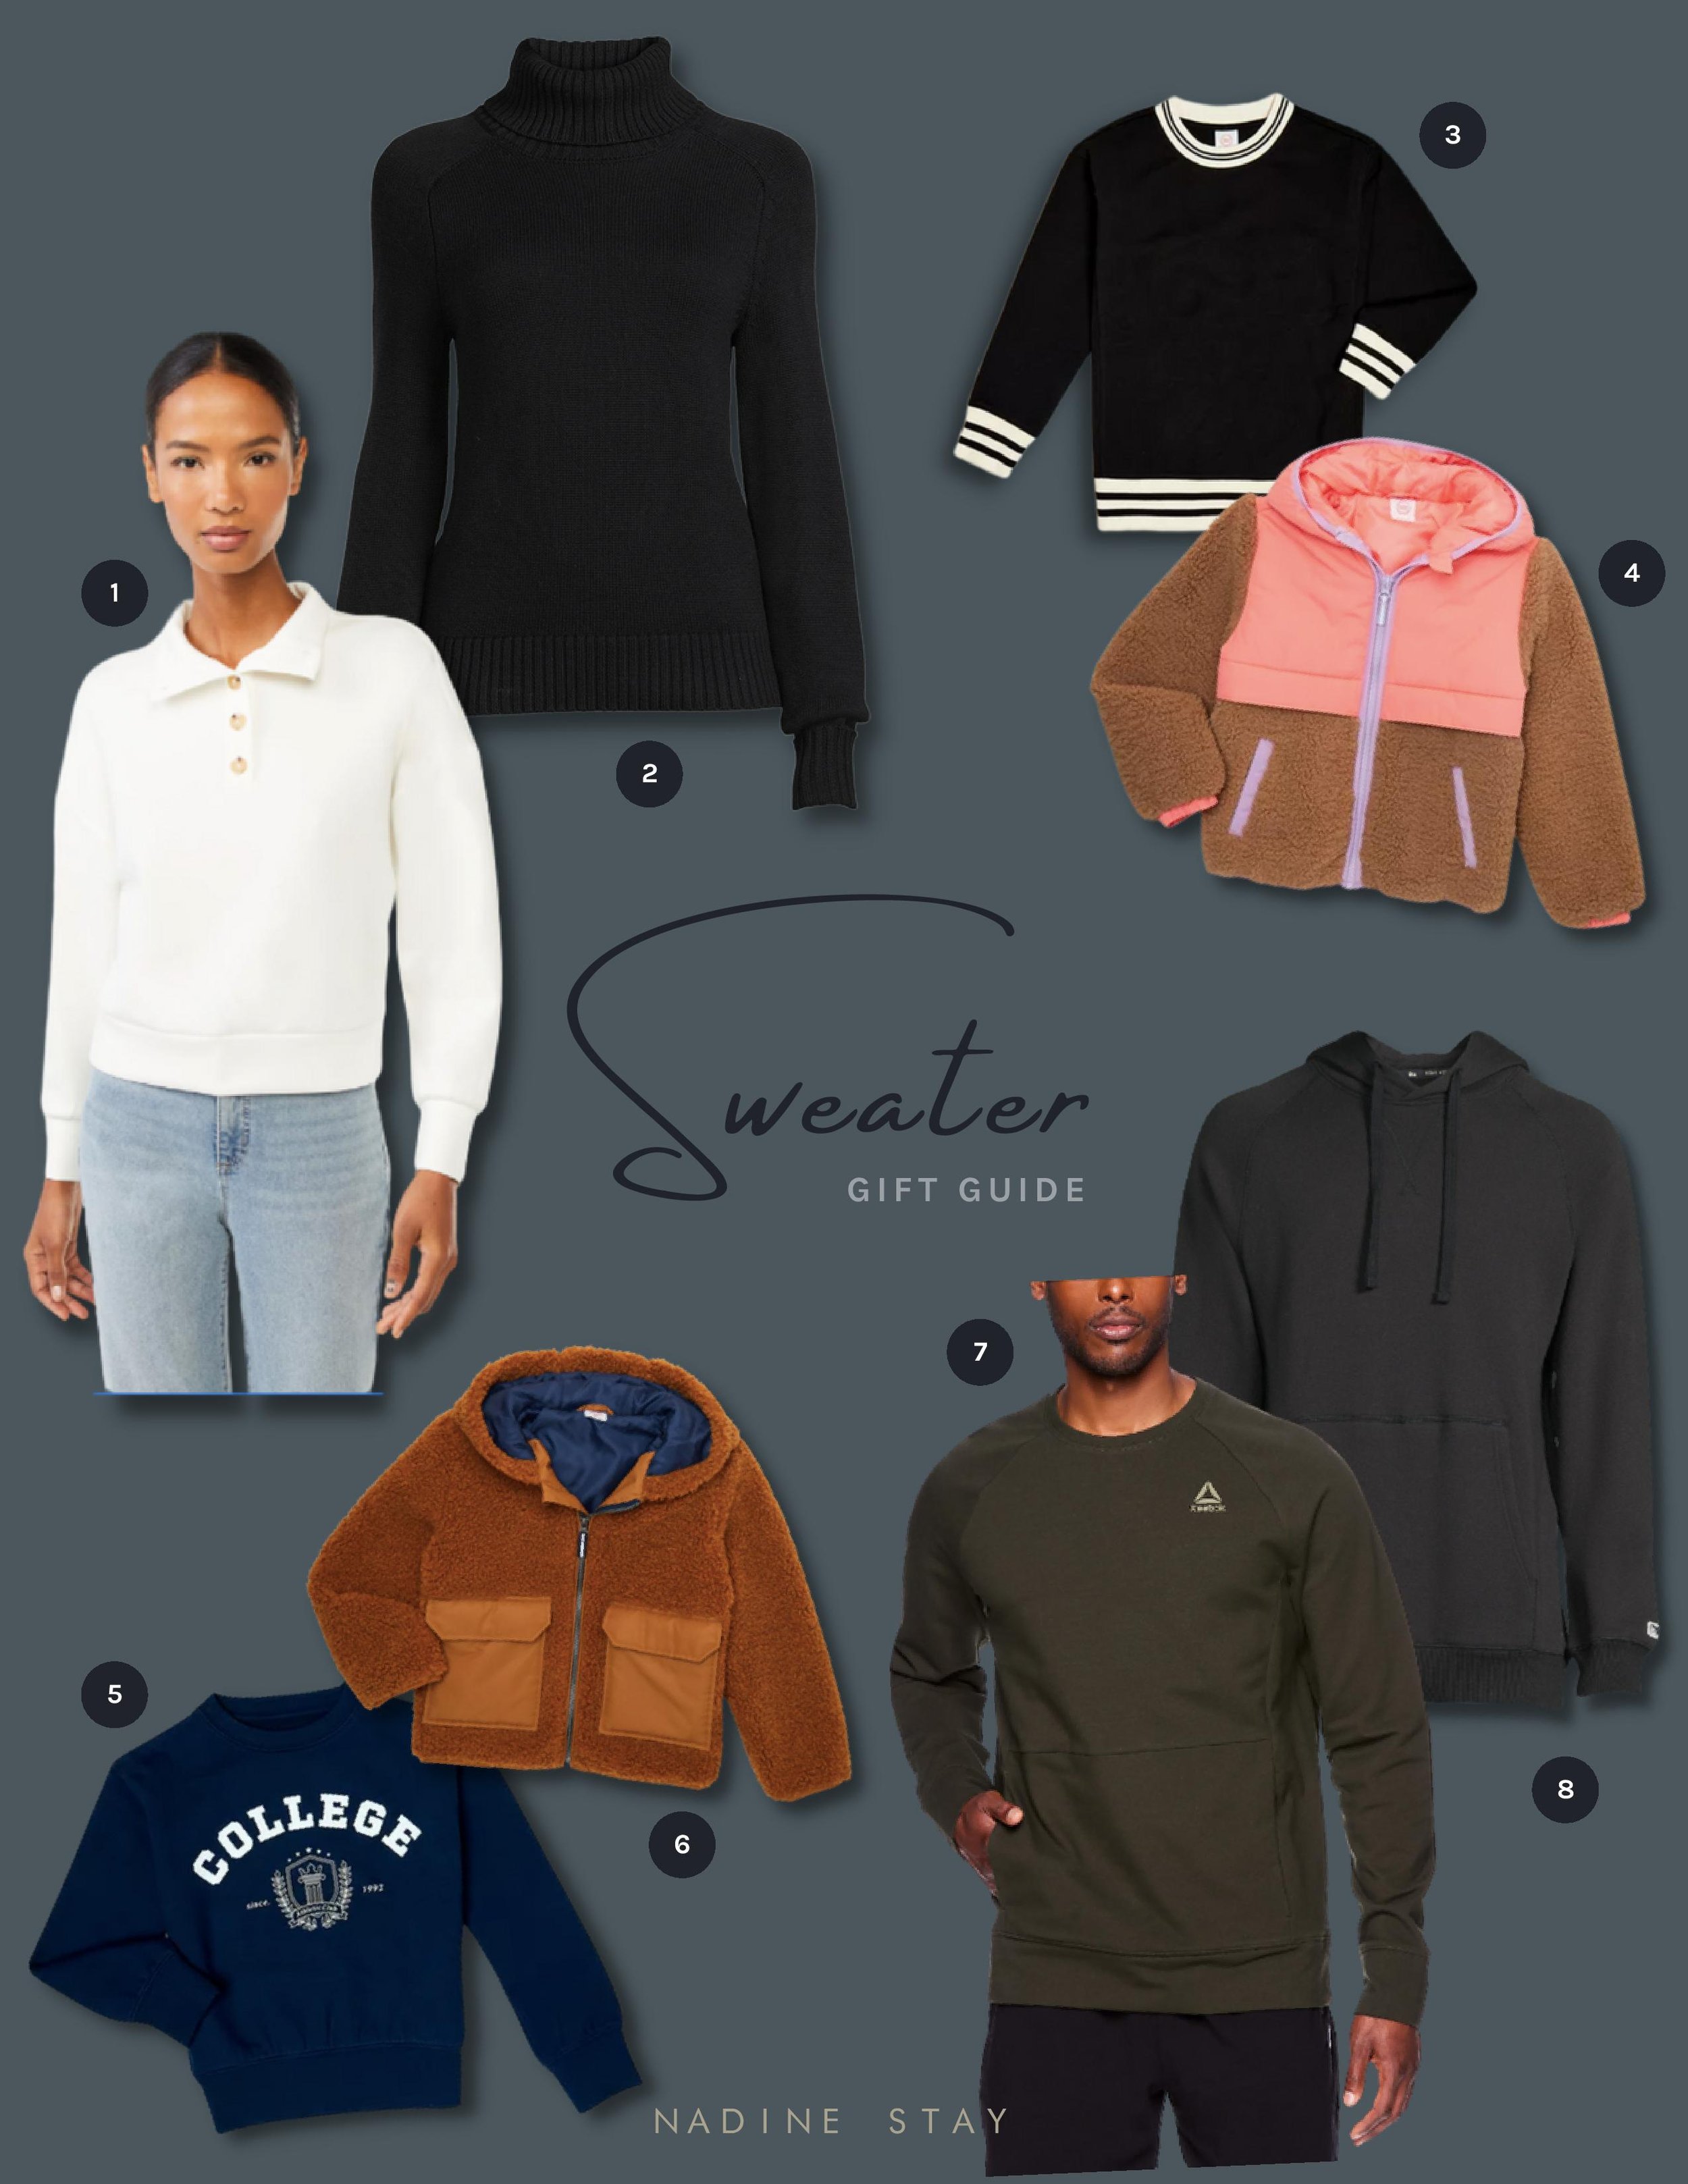 Sweater gift guide - sweaters to gift him, her, girls, boys, and babies. Budget friendly sweaters to gift this holiday. Christmas sweater gift ideas. Teddy jacket, reebok sweater, boys and girls jackets. | Nadine Stay